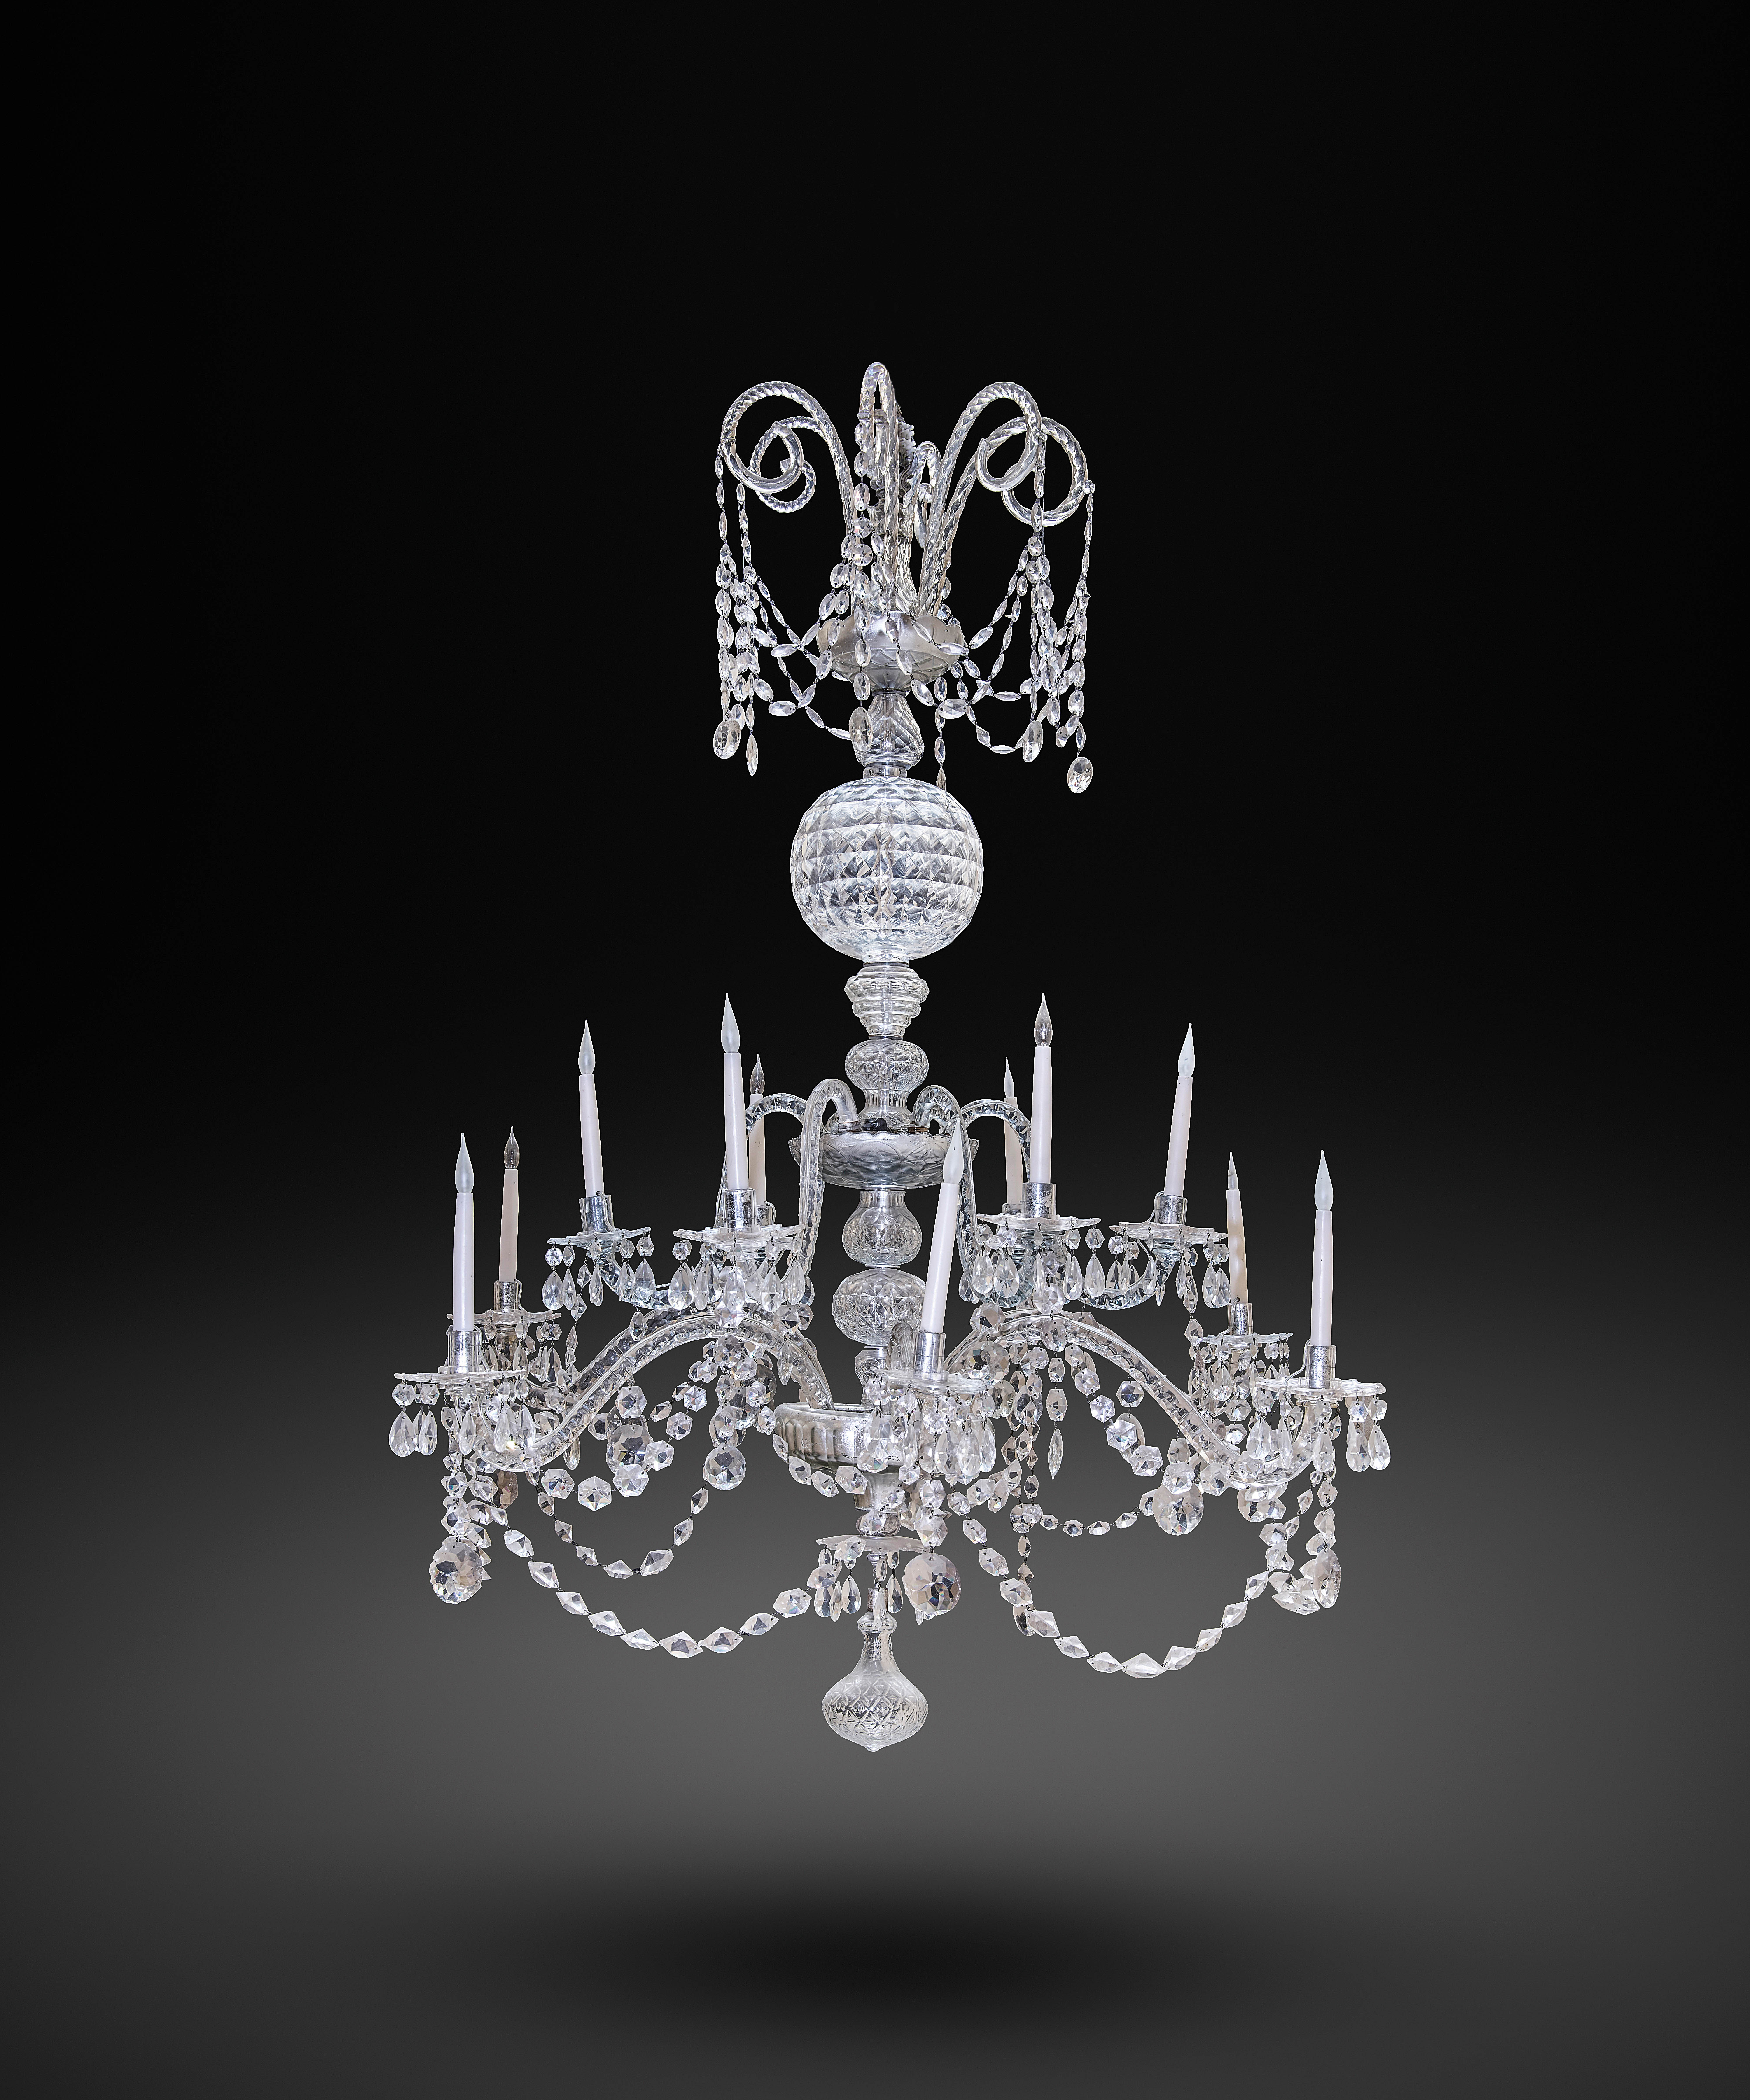 A LARGE CUT-GLASS TWELVE LIGHT CHANDELIER IN GEORGE III STYLE, 19TH CENTURY the faceted ovoid